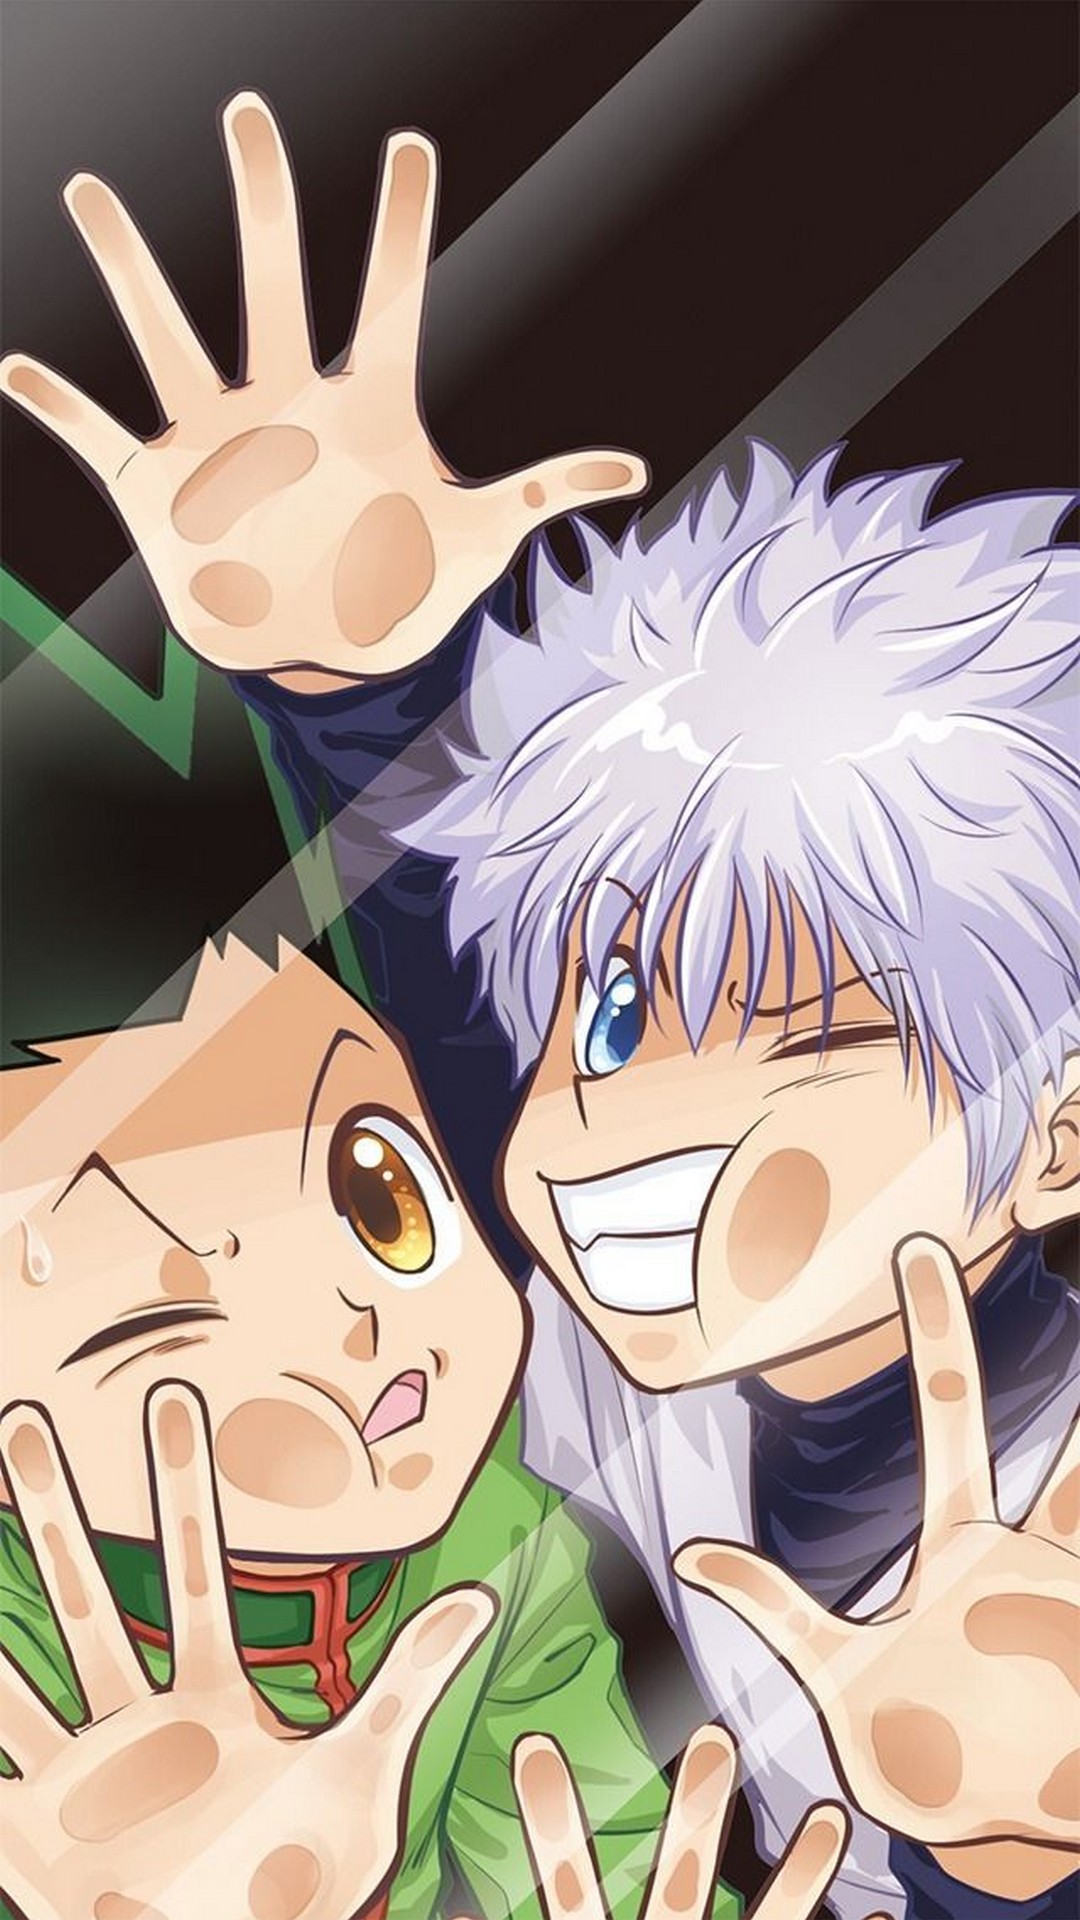 Gon And Killua iPhone Wallpaper HD with high-resolution 1080x1920 pixel. You can set as wallpaper for Apple iPhone X, XS Max, XR, 8, 7, 6, SE, iPad. Enjoy and share your favorite HD wallpapers and background images